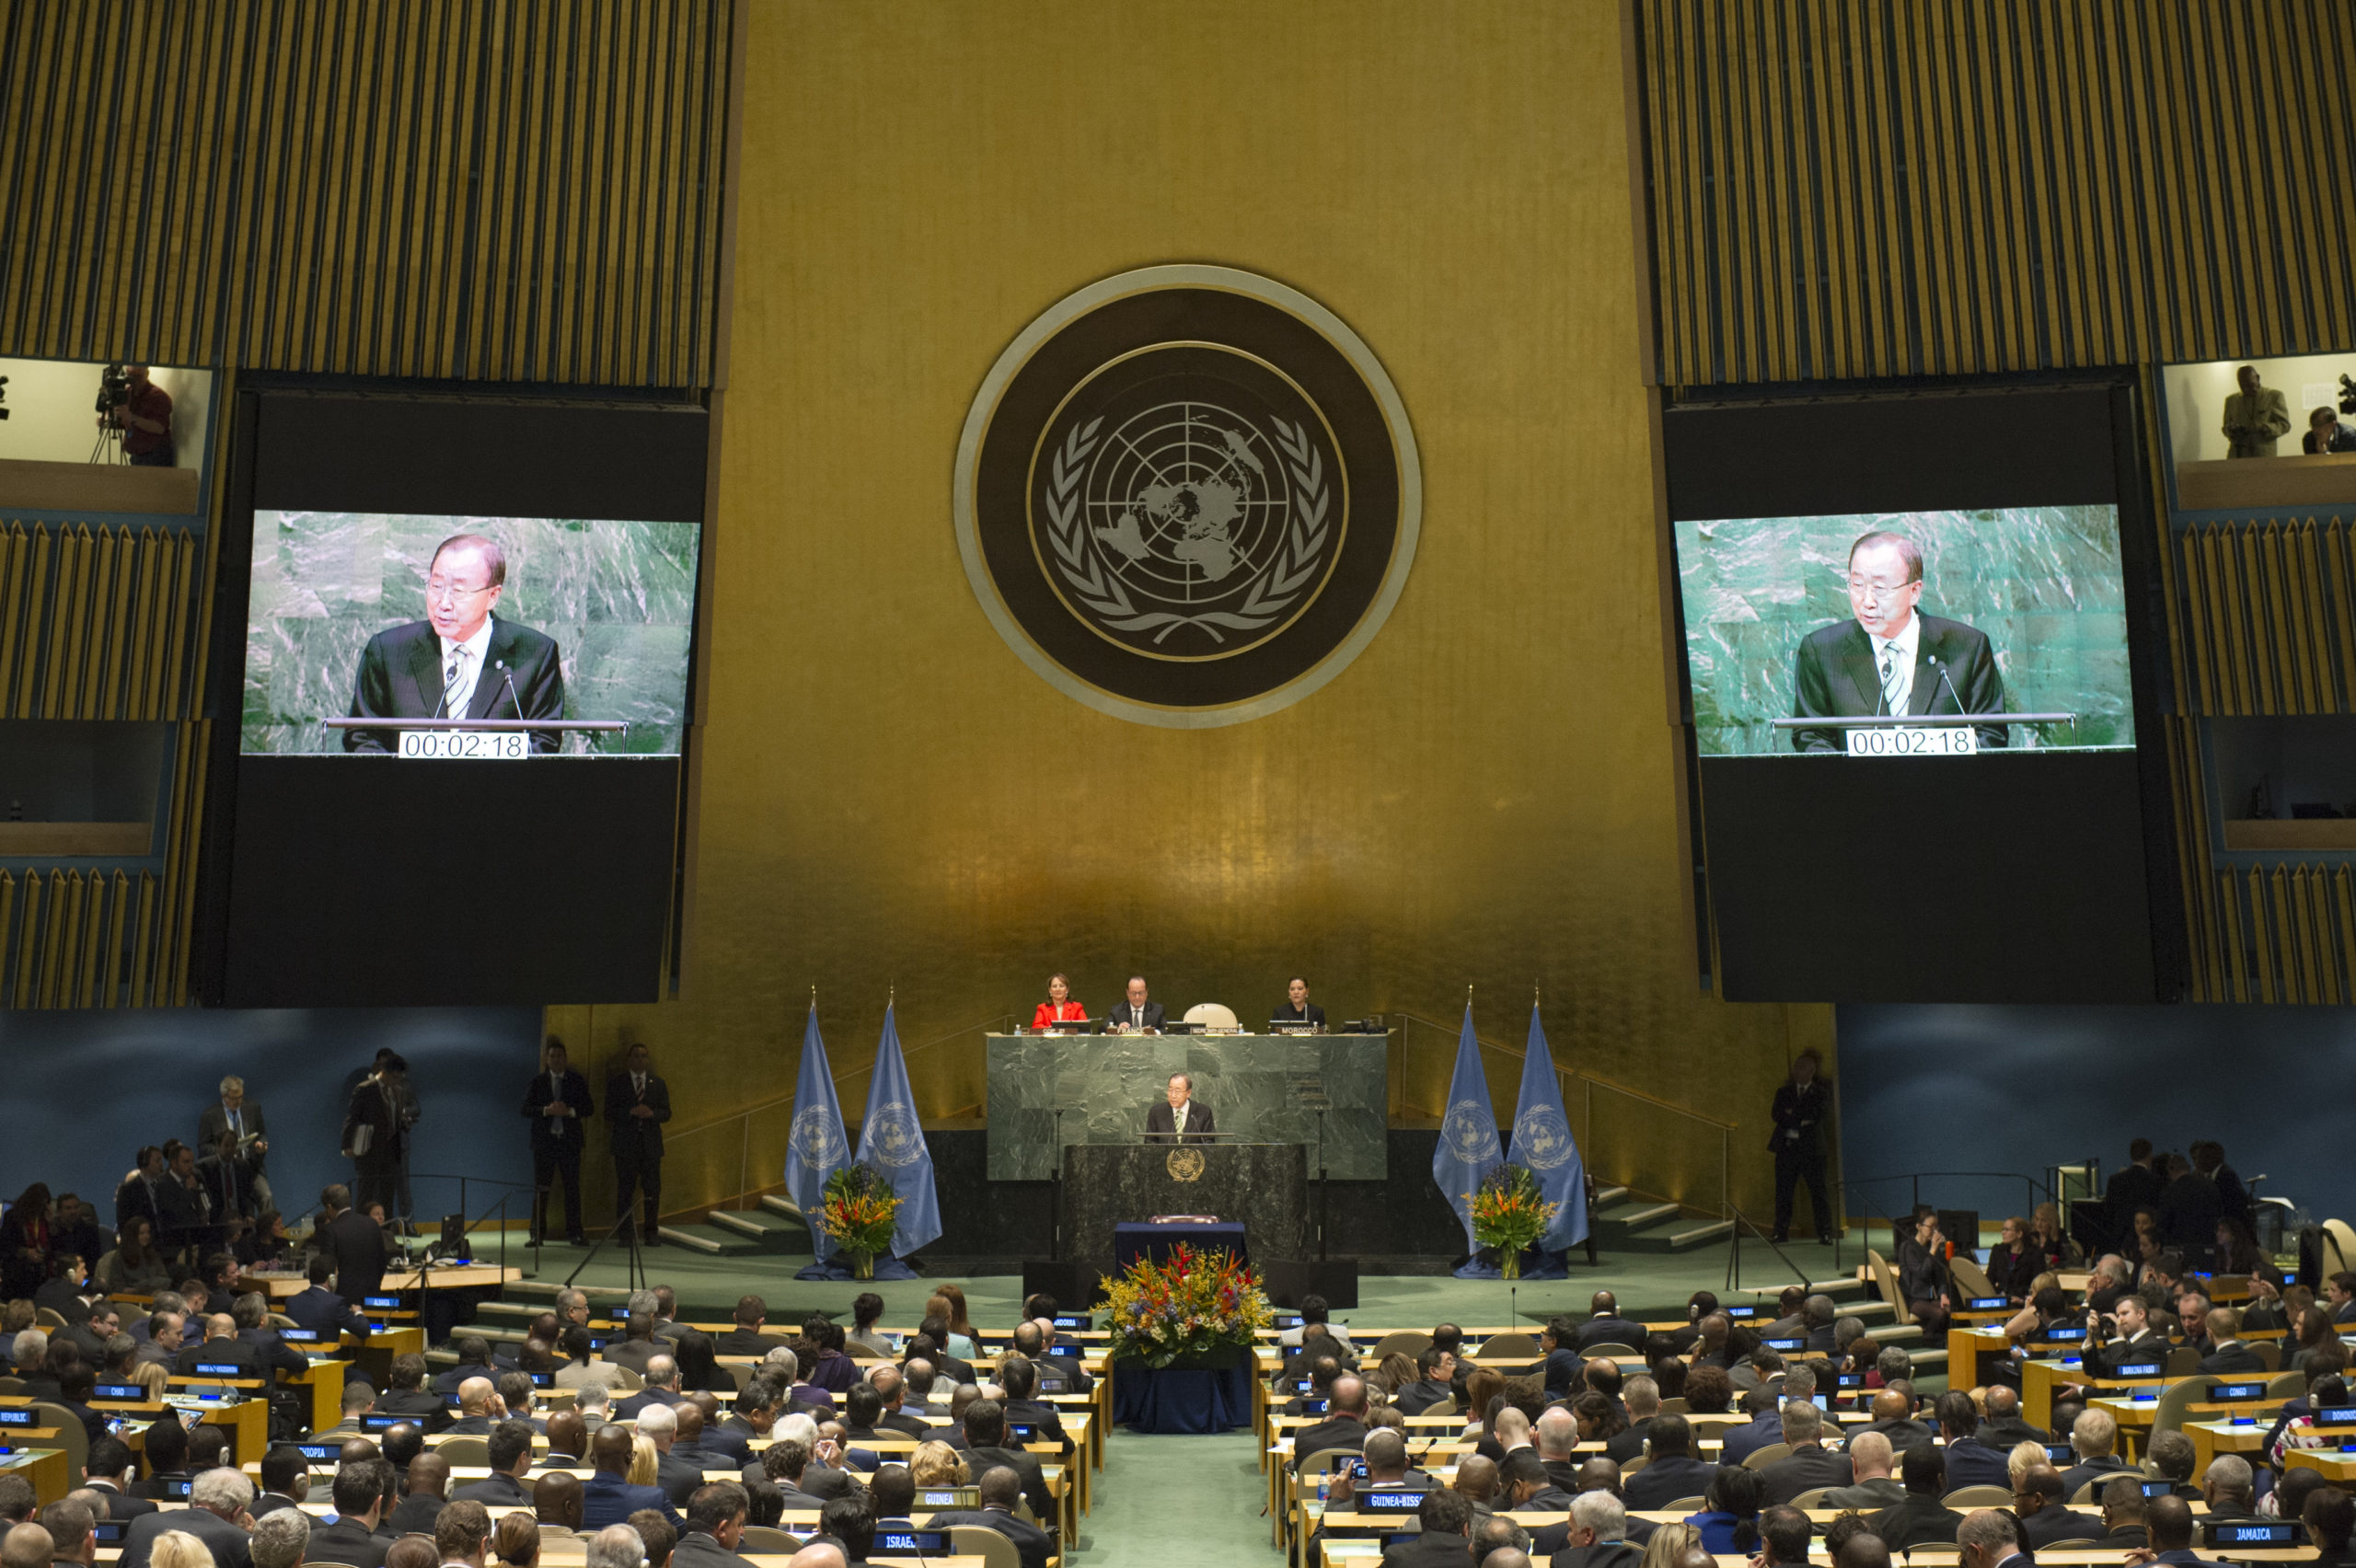 Former Secretary-General Ban Ki-moon hosted a signing ceremony for the Paris Agreement on Climate Change on 22 April 2016 at the United Nations in New York. Credit: UN Photo/Rick Bajornas